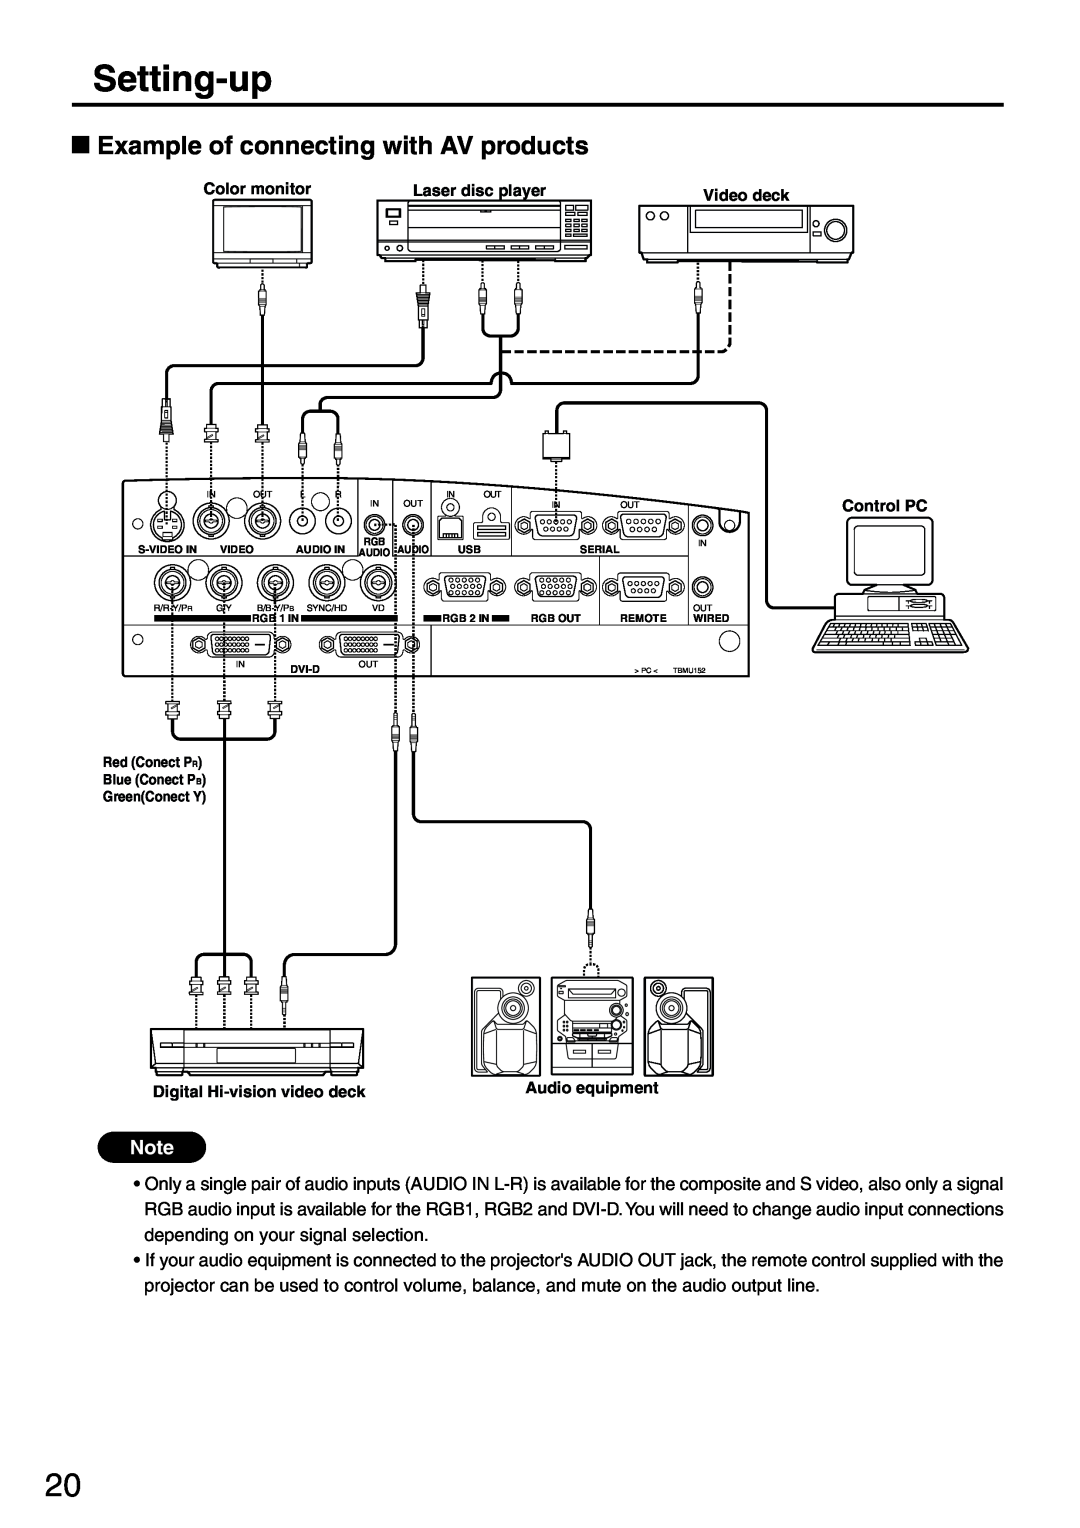 Panasonic PT-L6510U manual Setting-up, Example of connecting with AV products 